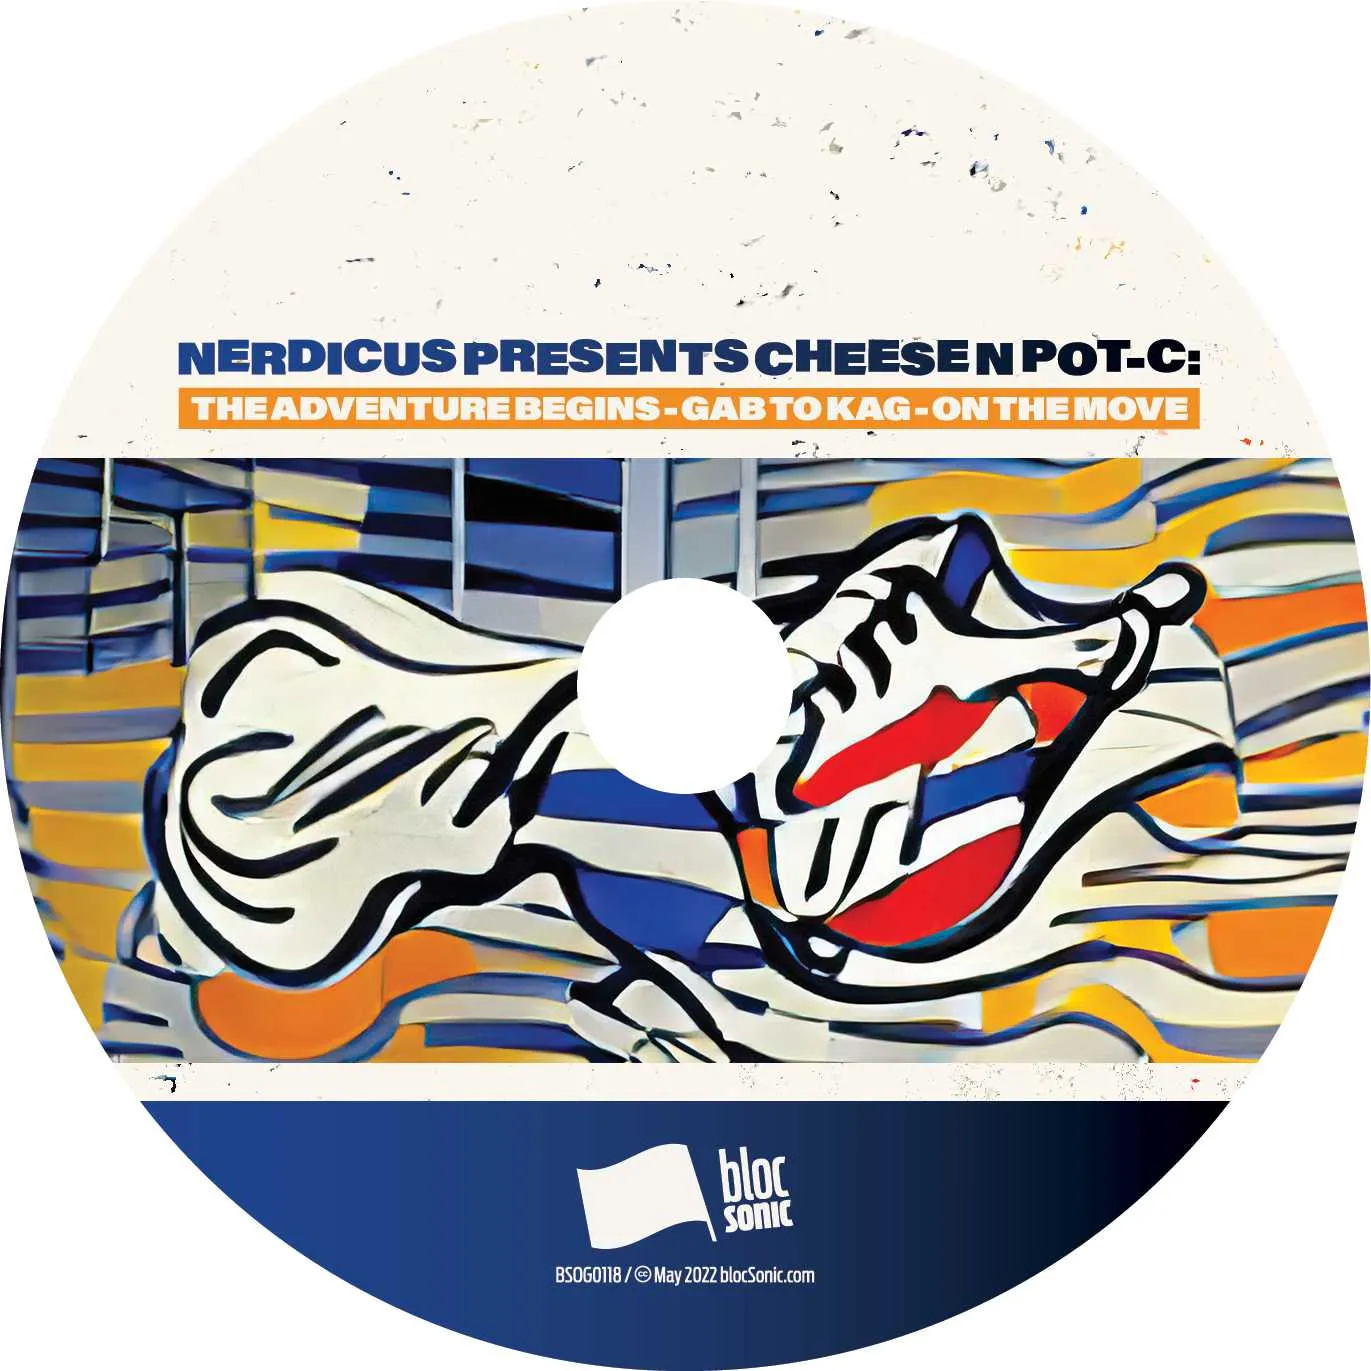 Album disc for “Nerdicus Presents Cheese N Pot-C: The Adventure Begins - Gab to Kag - On The Move” by Cheese N Pot-C